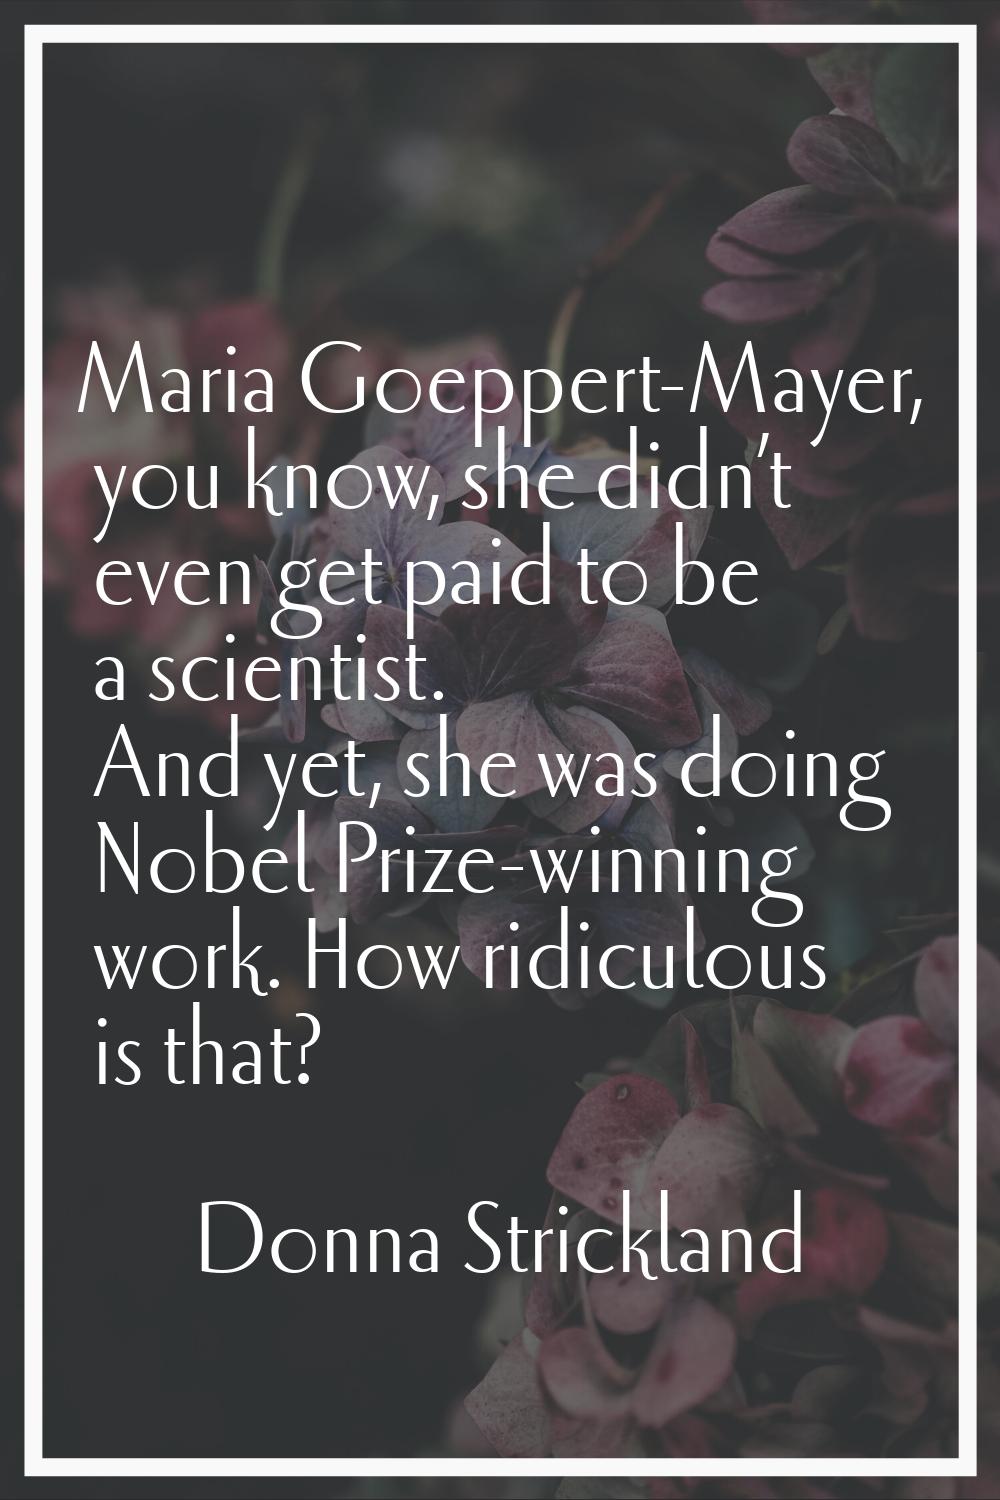 Maria Goeppert-Mayer, you know, she didn’t even get paid to be a scientist. And yet, she was doing 